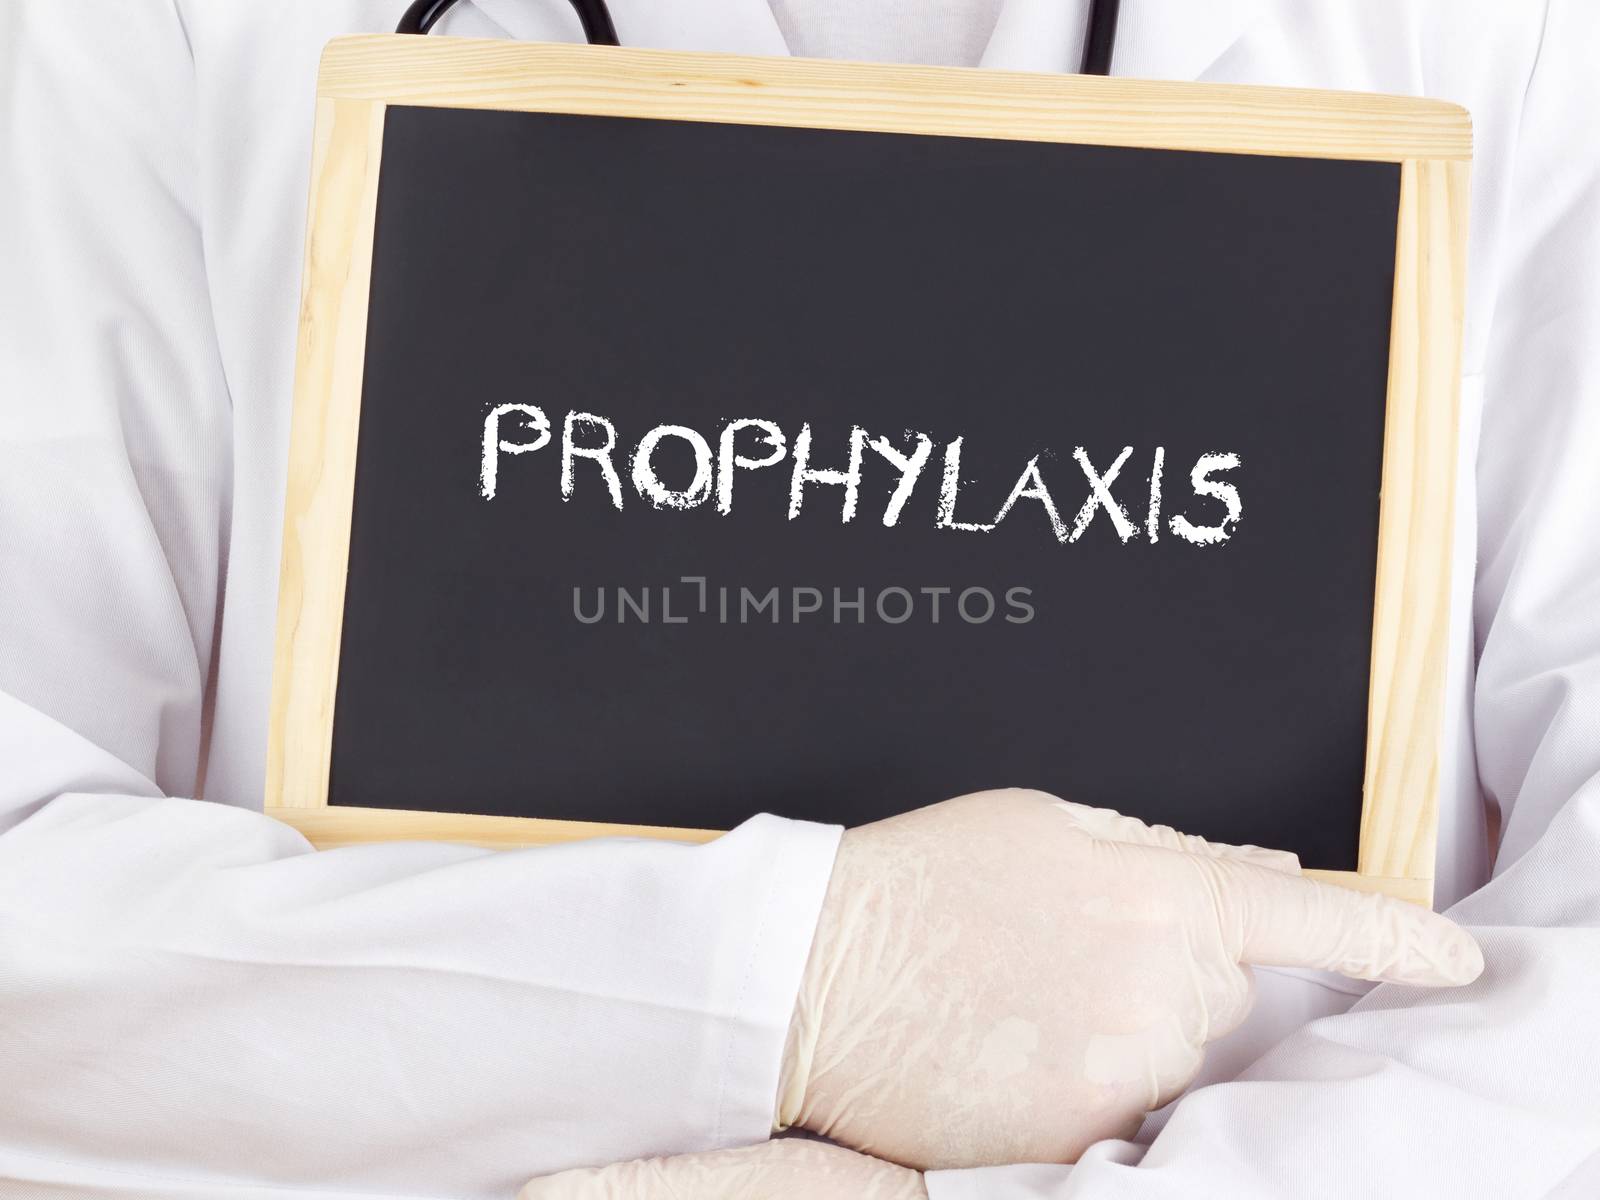 Doctor shows information on blackboard: prophylaxis by gwolters